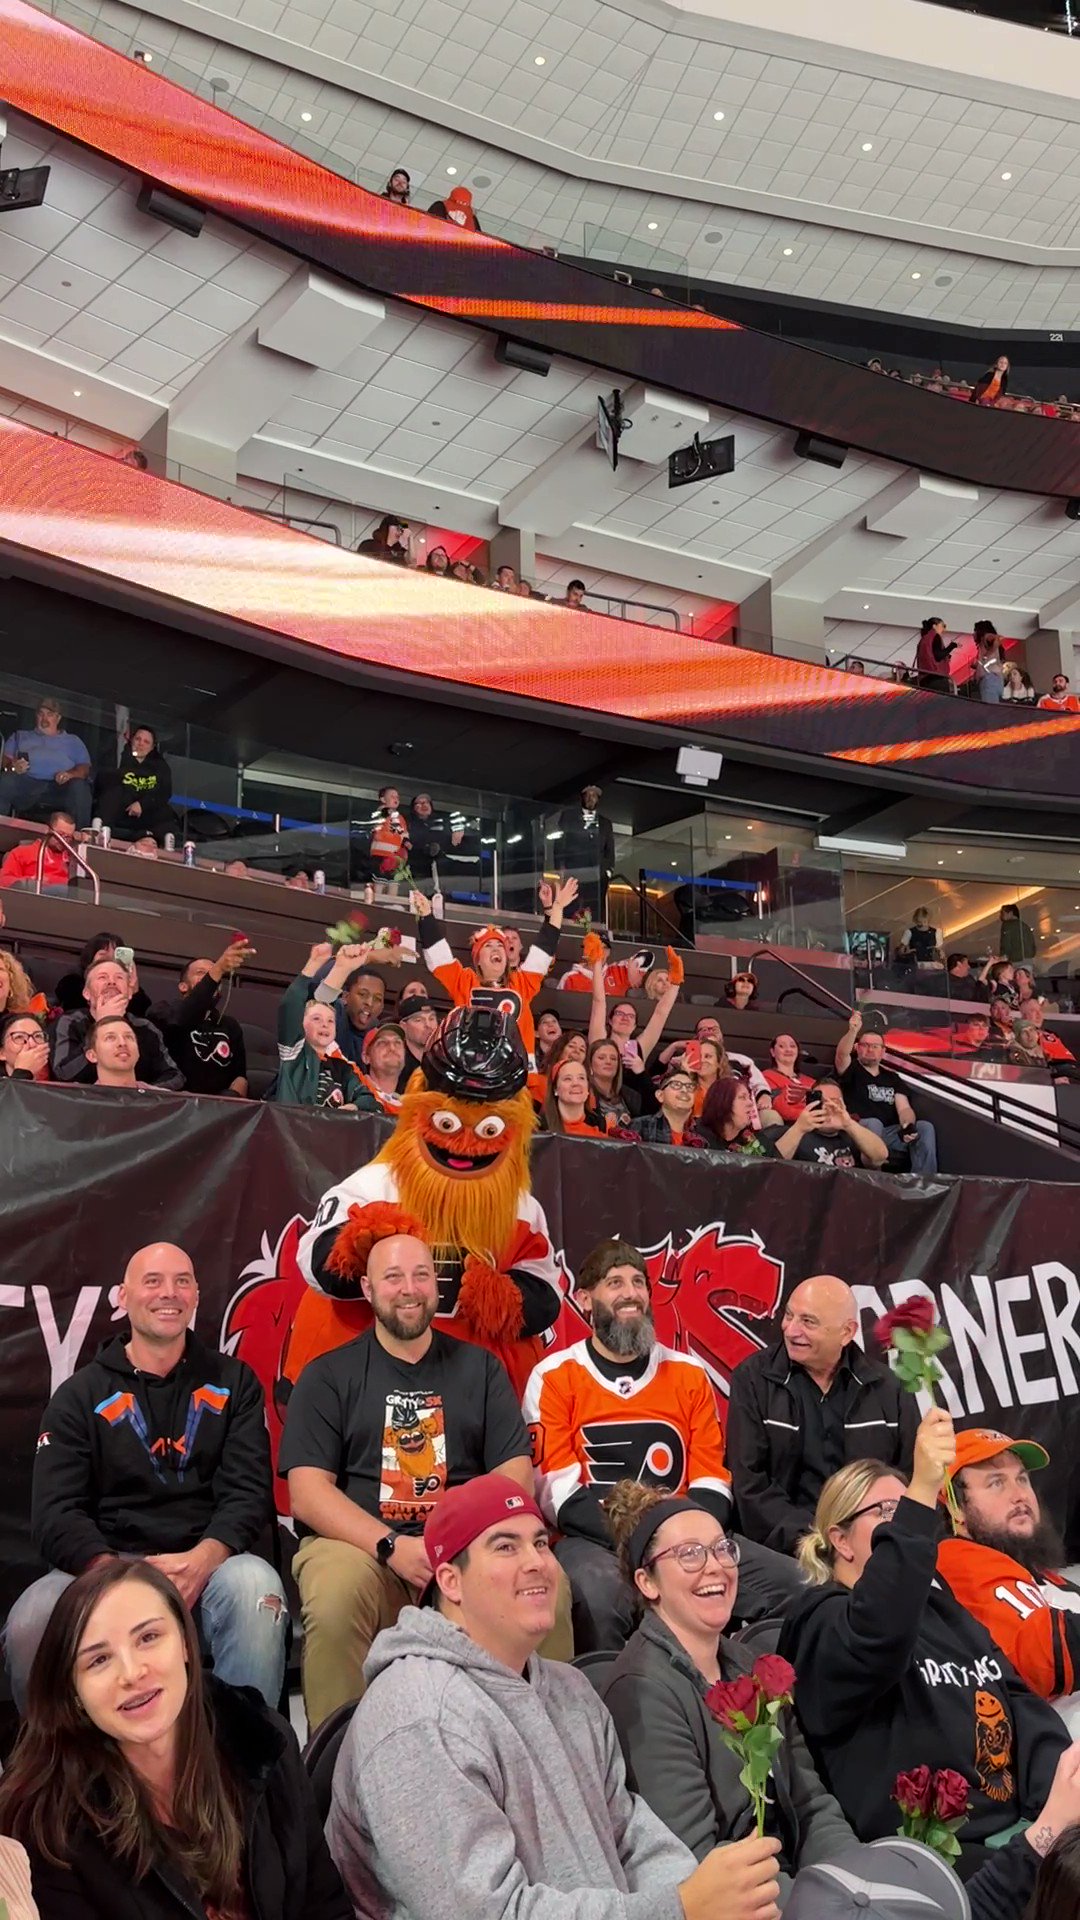 What the Puck?' Philadelphia Flyers' New Mascot Gritty Shocks Twitter